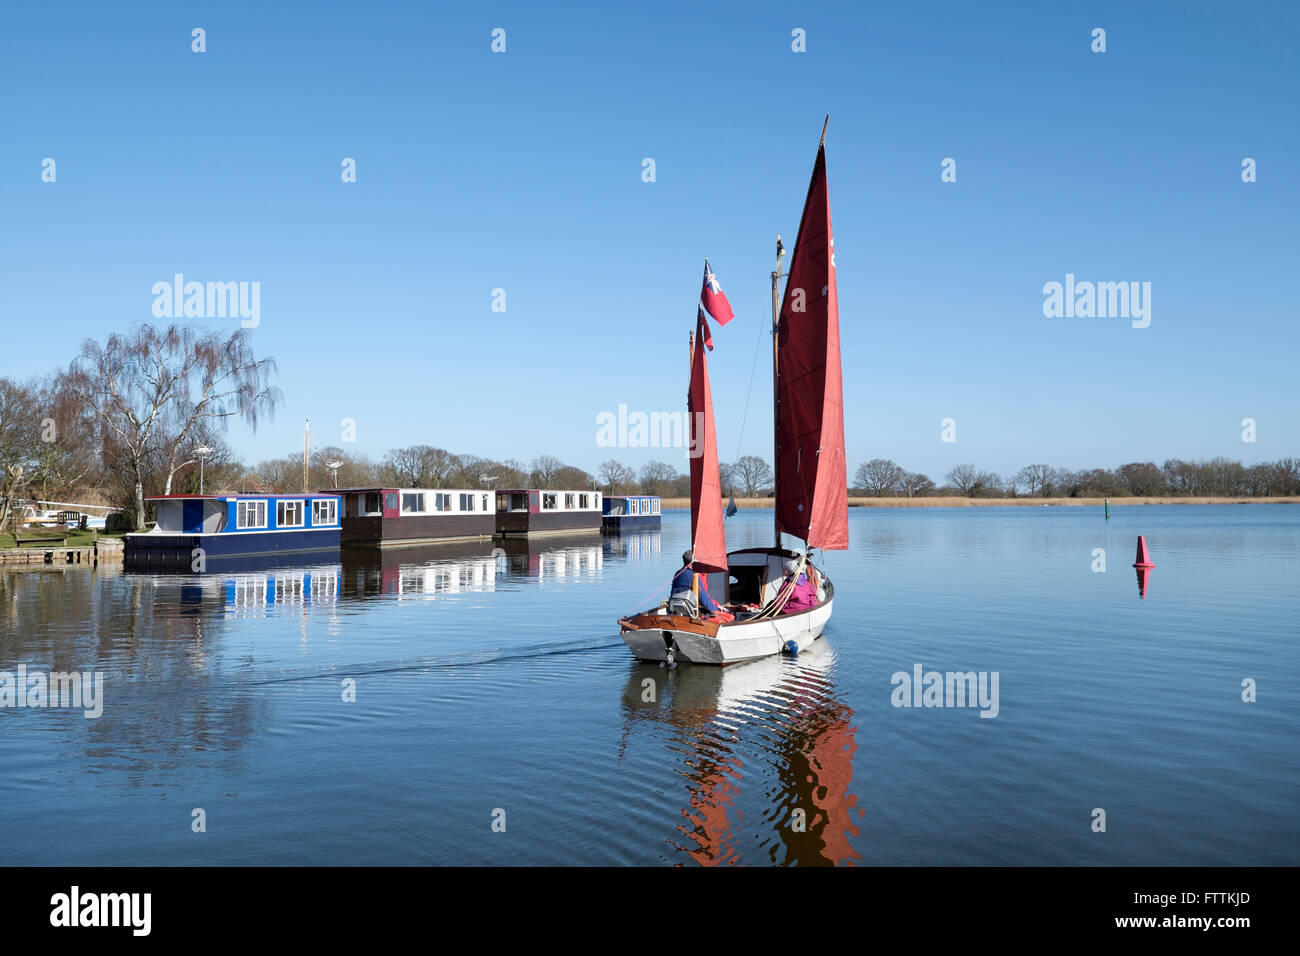 A traditional sailing dinghy sails past a row of houseboats on Hickling Broad, Norfolk, England, UK Stock Photo